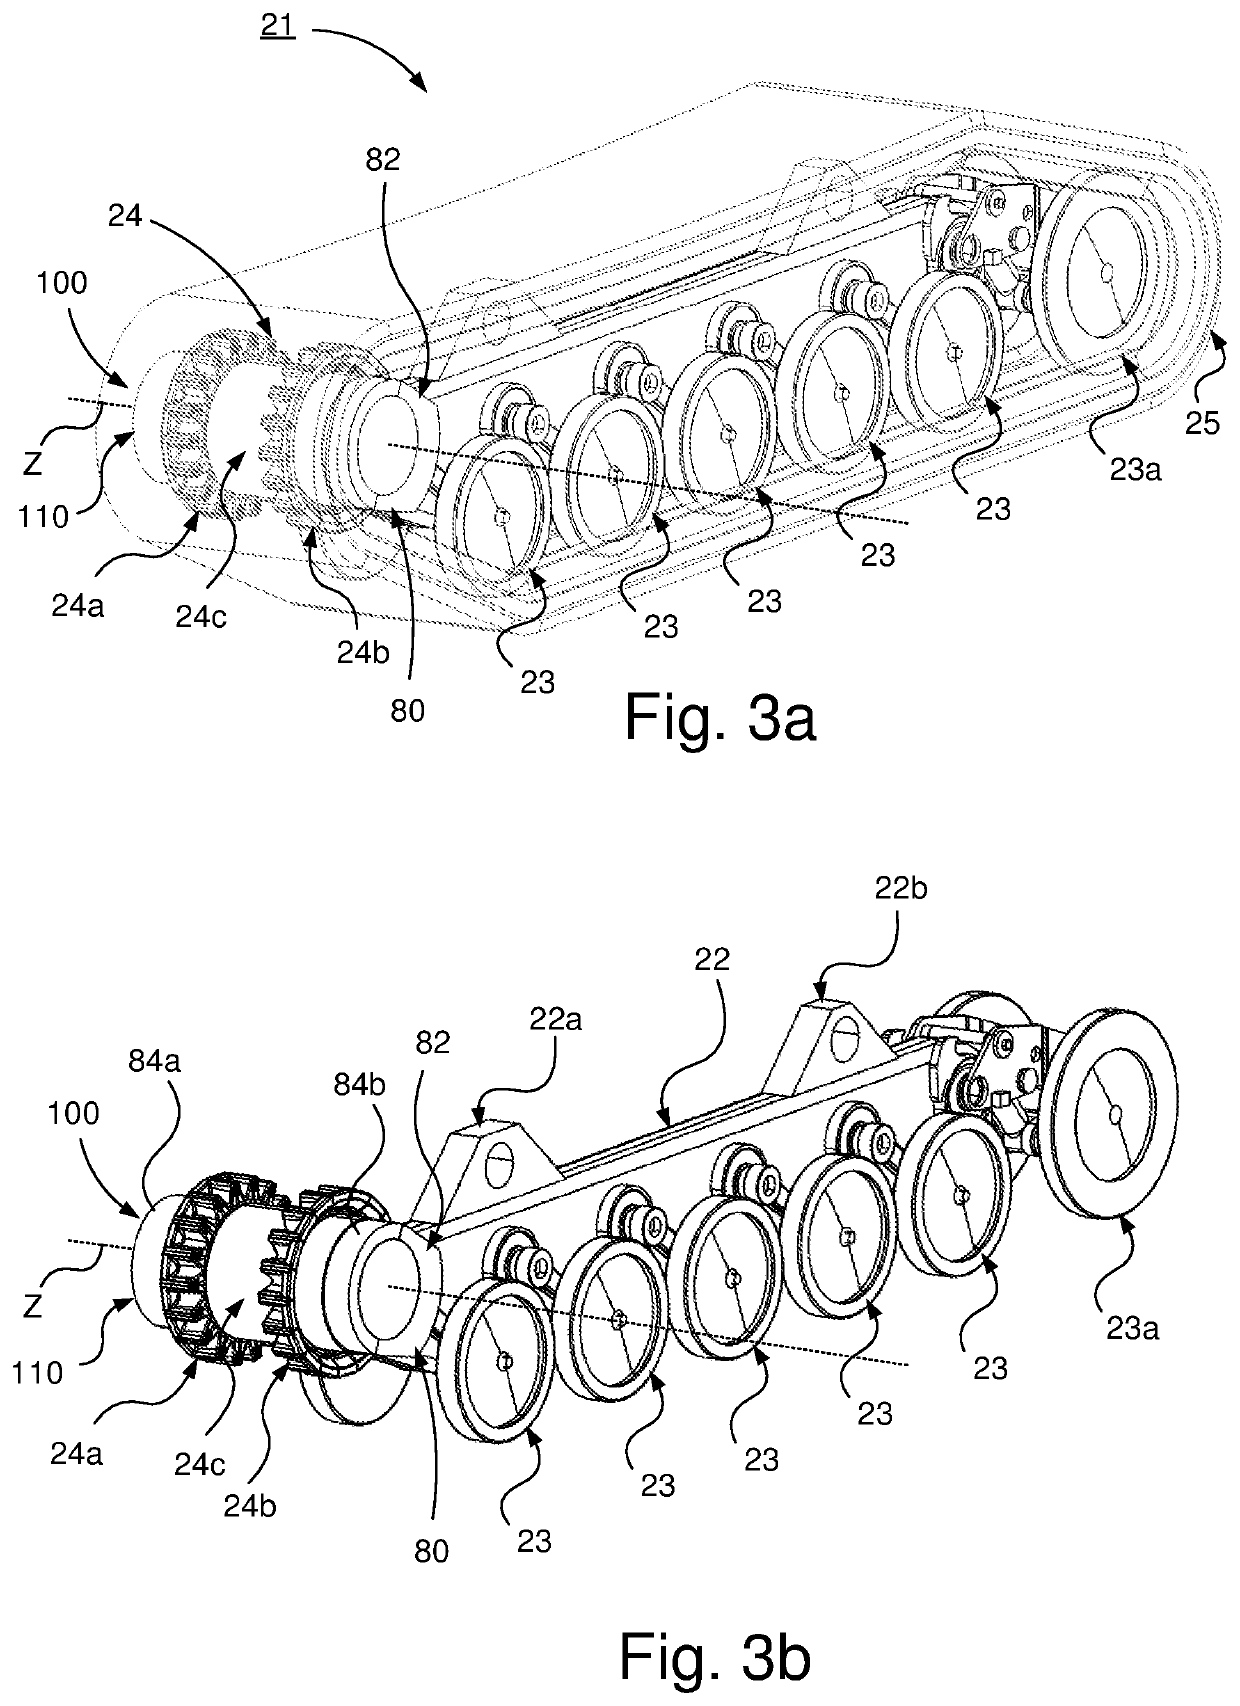 Tracked vehicle having motor coaxially arranged with drive wheel